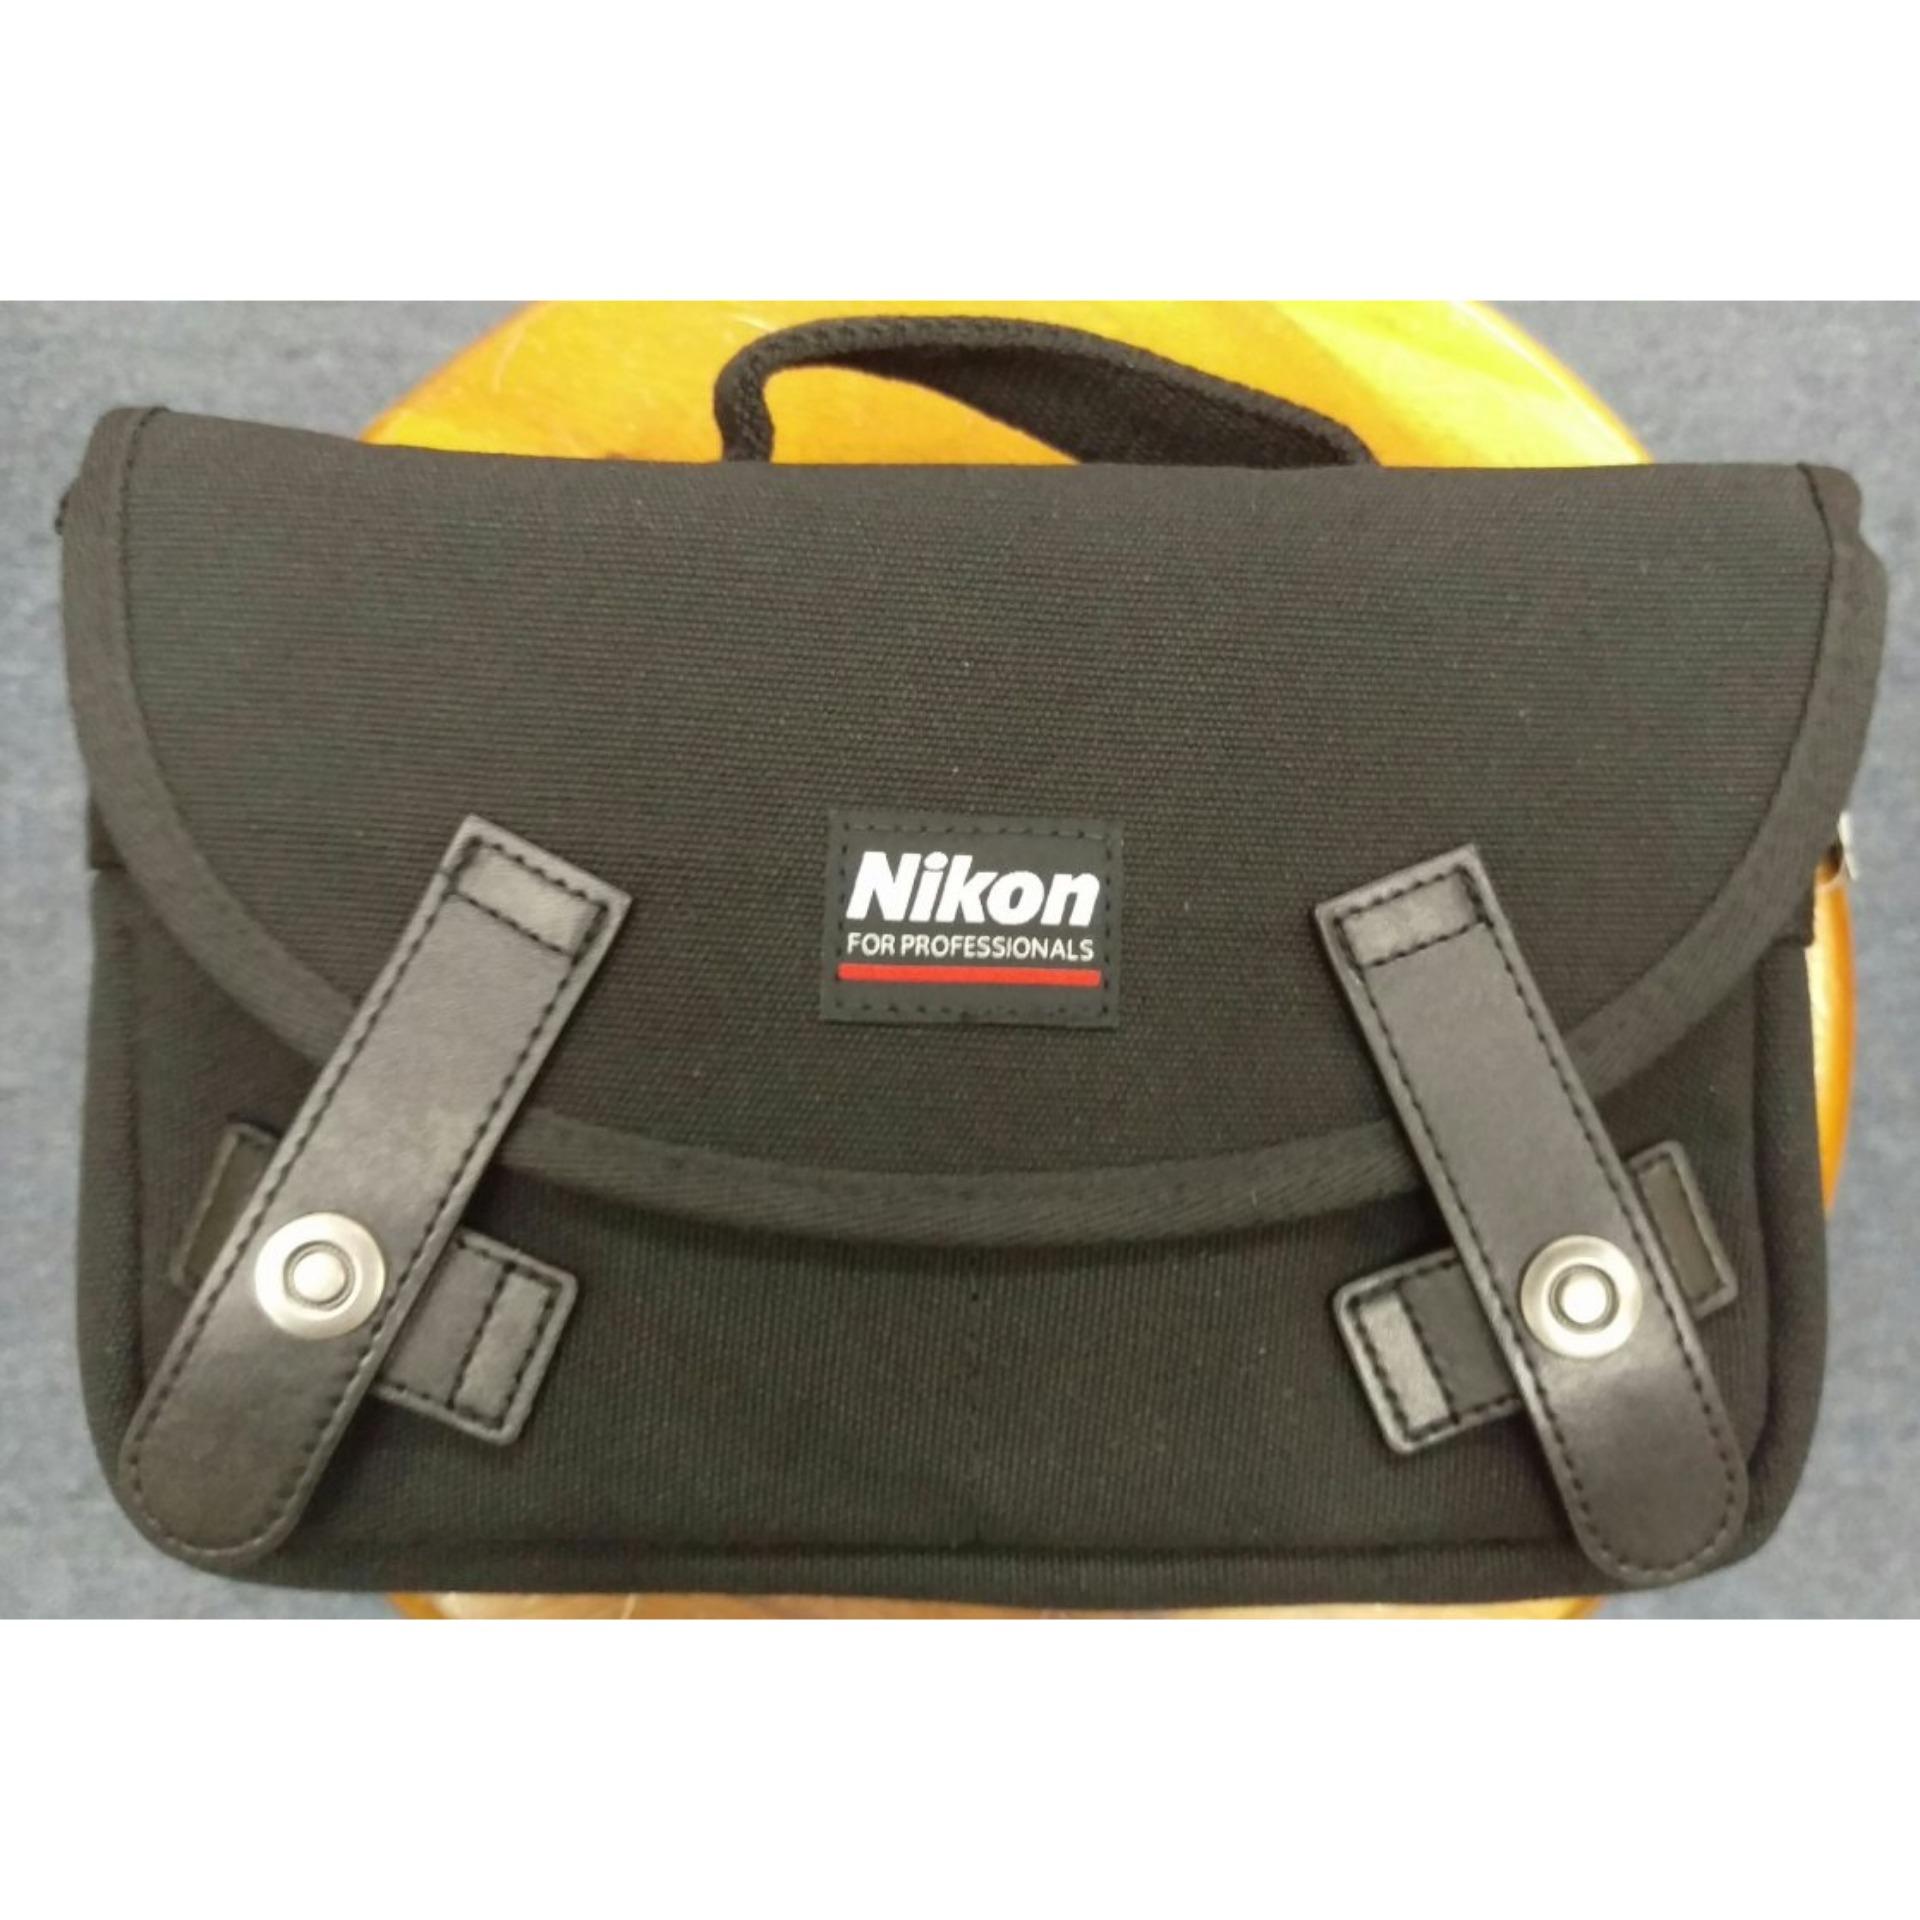 (Local) Nikon D7500 DSLR Camera (Body Only) + Nikon Promotion (Please note that price is after cashback)